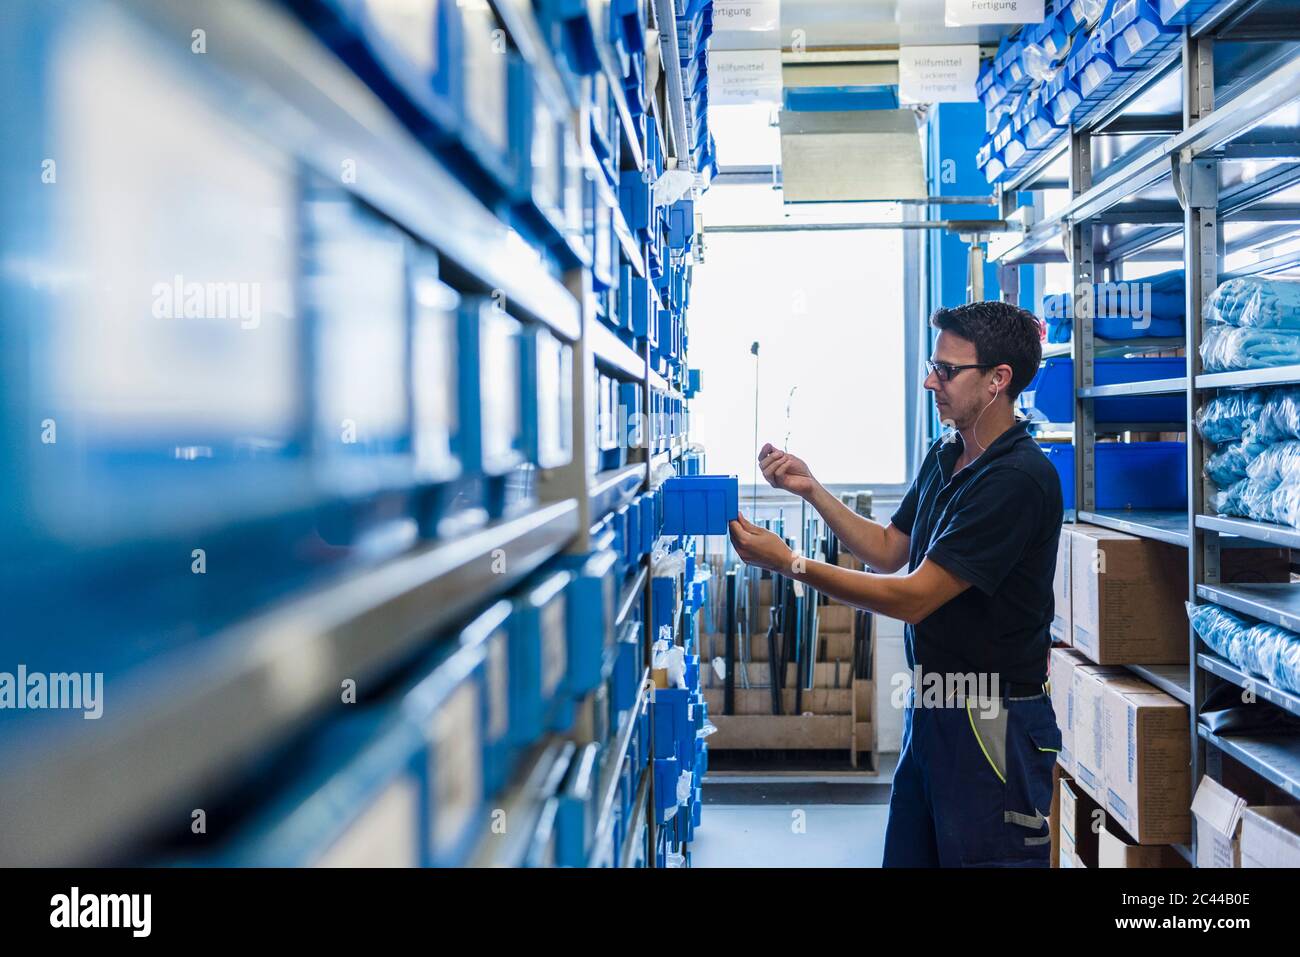 Man in storage room of a factory Stock Photo